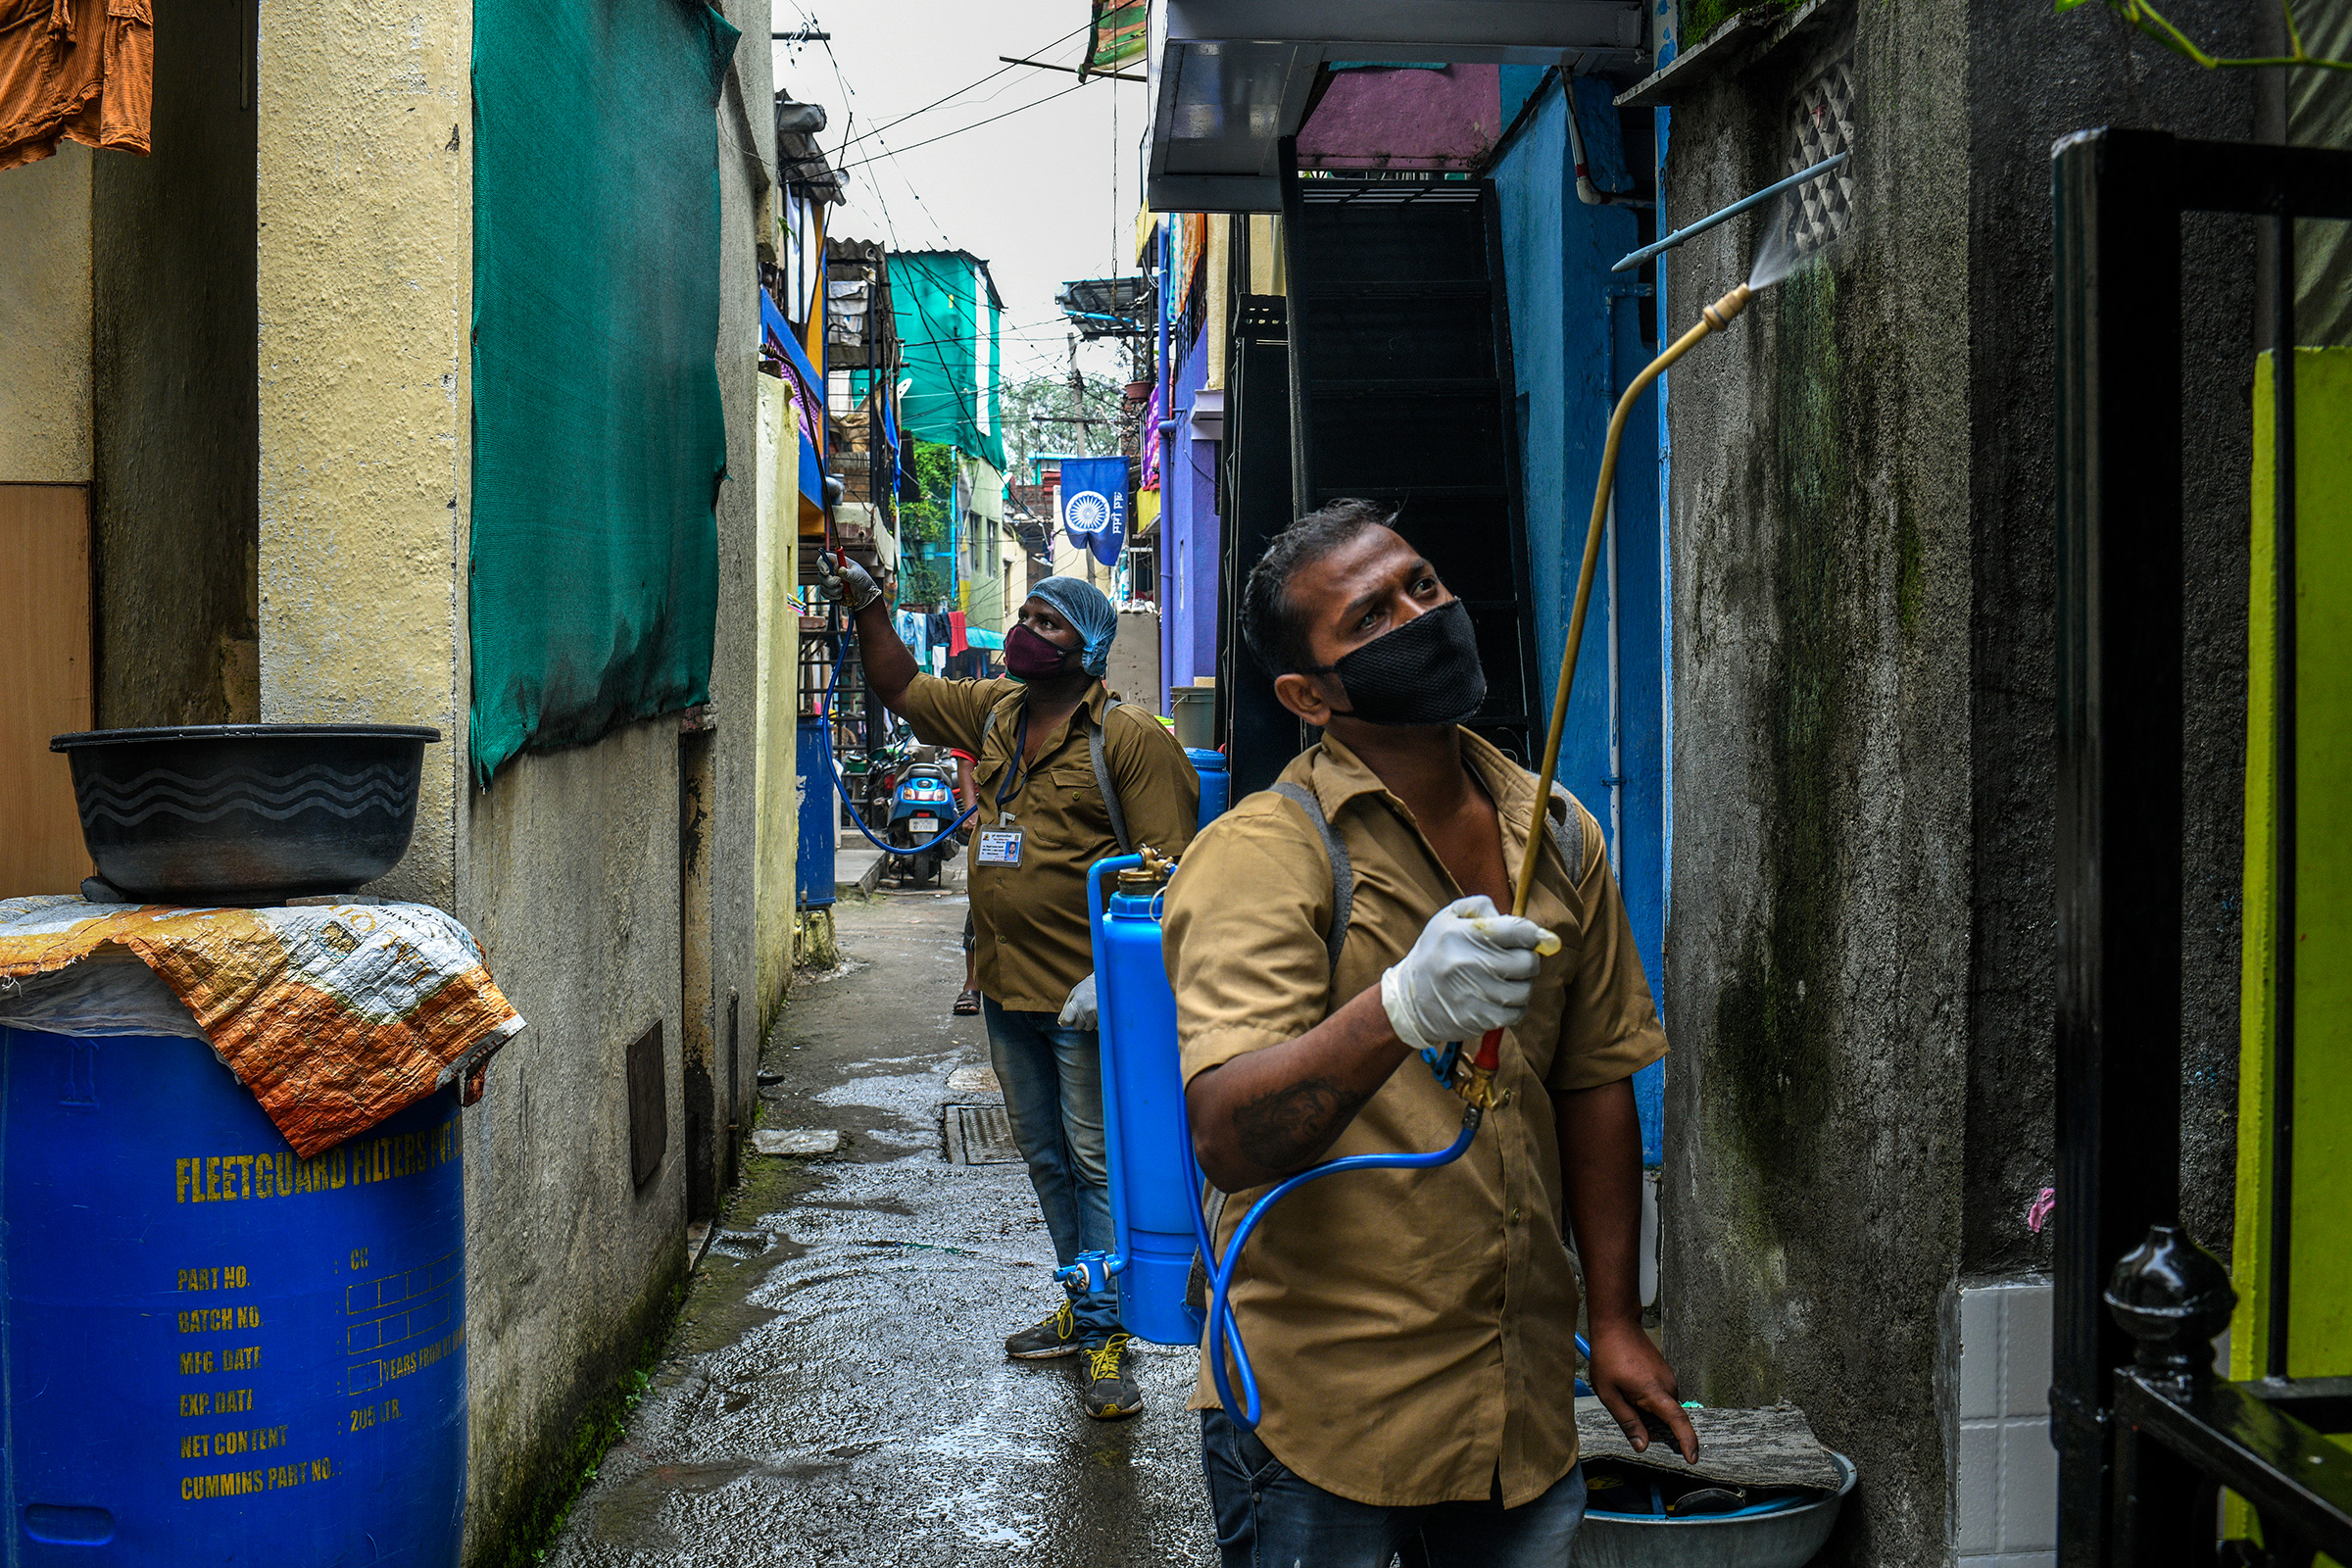 Workers from the Pune Municipal Corporation spray disinfectant in the Tadiwala Chawl area. (Atul Loke for TIME)